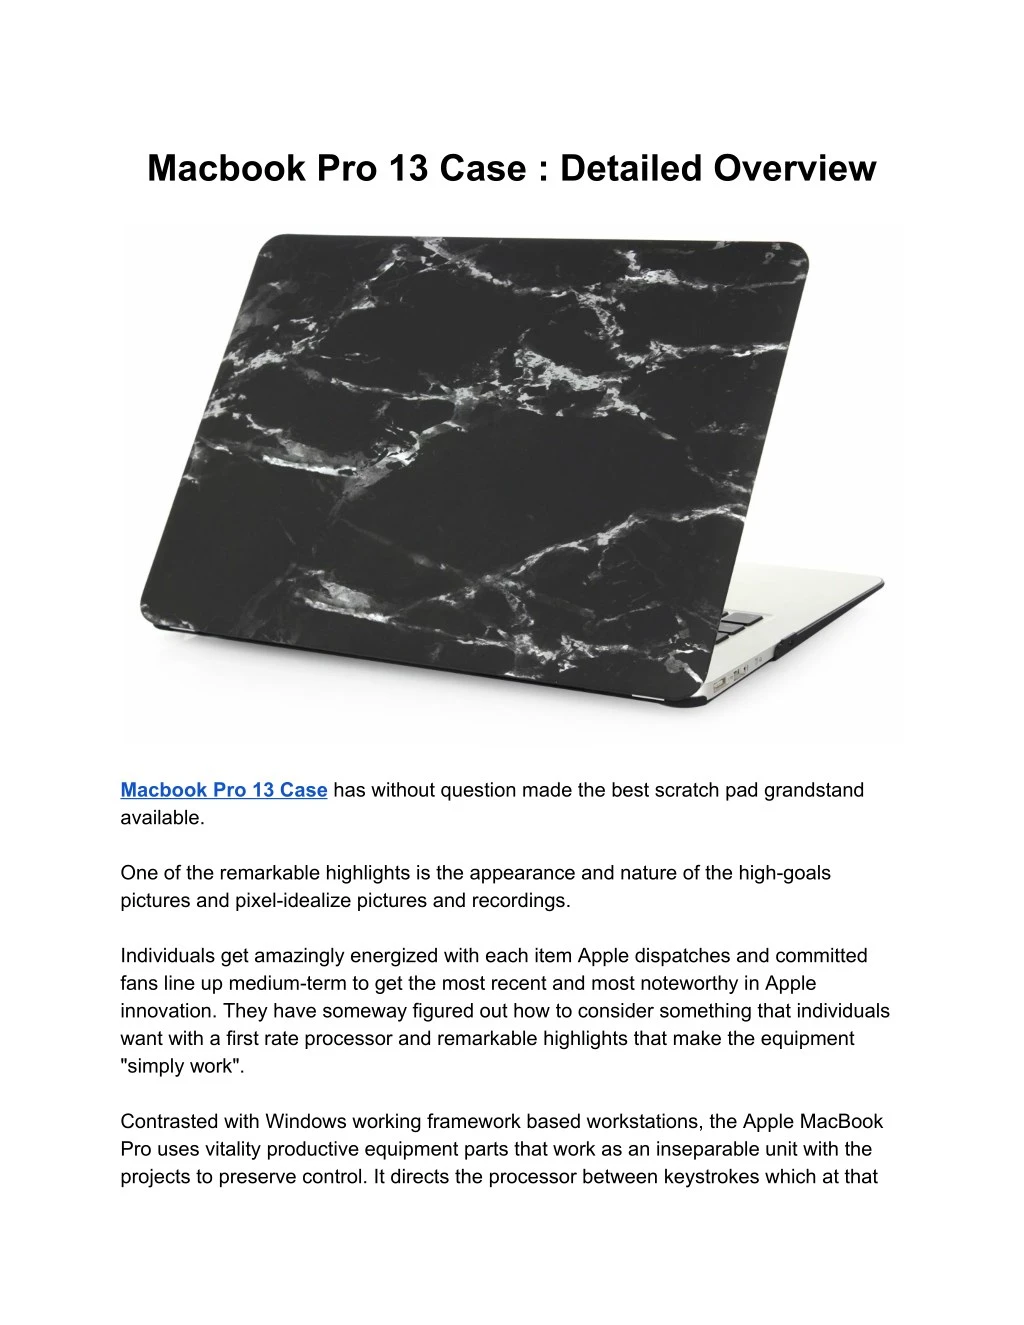 macbook pro 13 case detailed overview